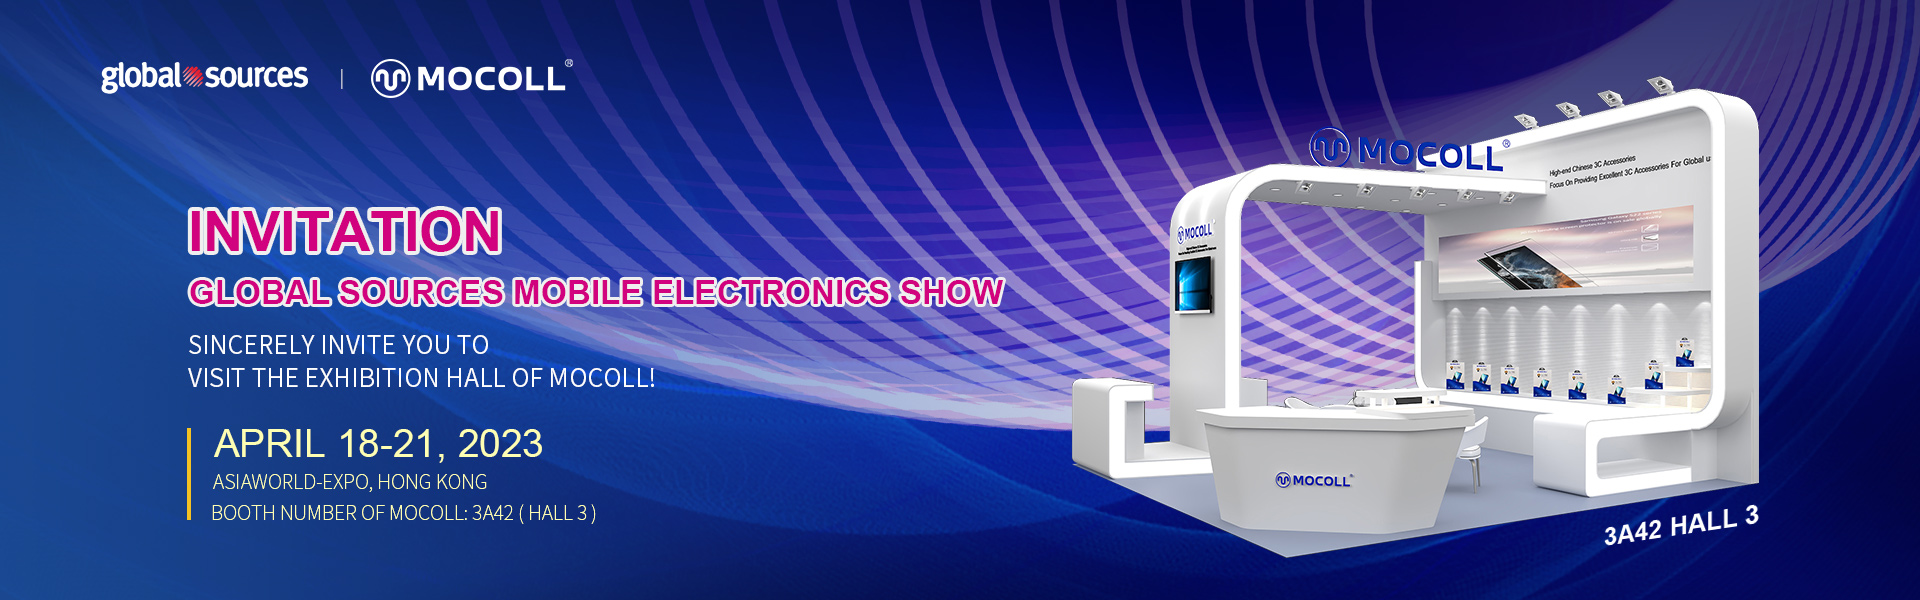 Einladung der Global Sources Mobile Electronics Show